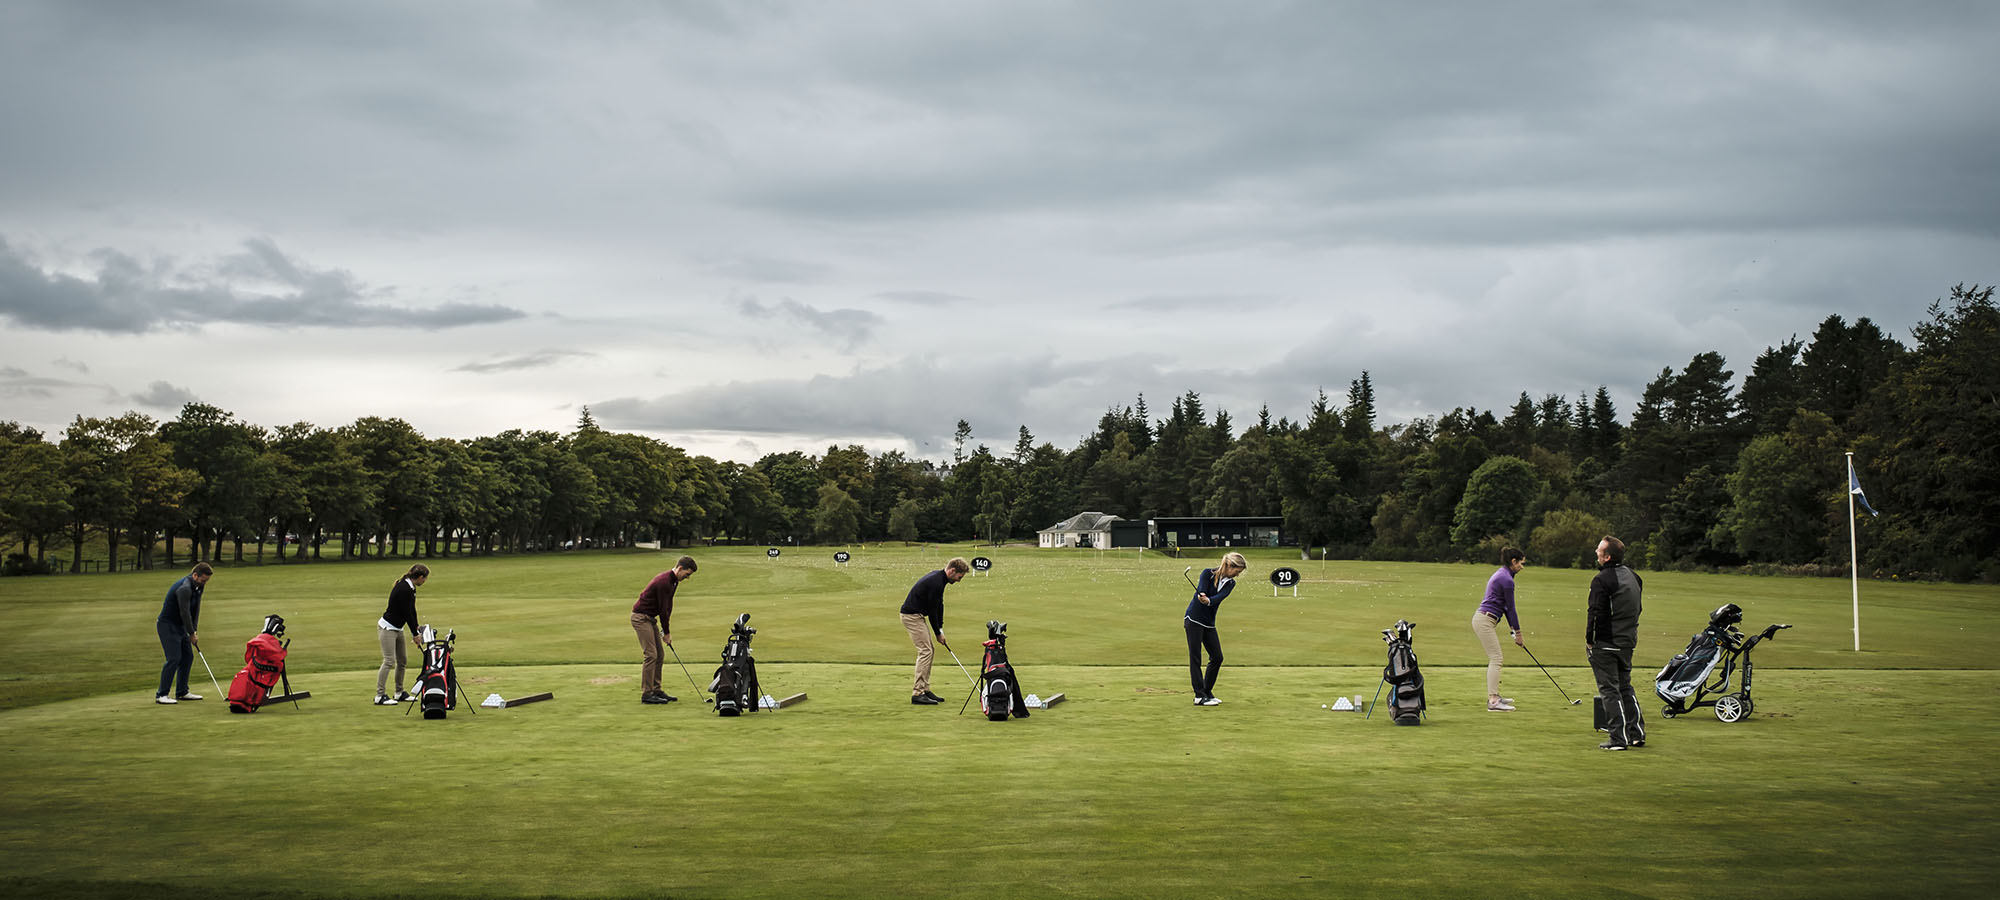 A group of golfers hit balls on a driving range